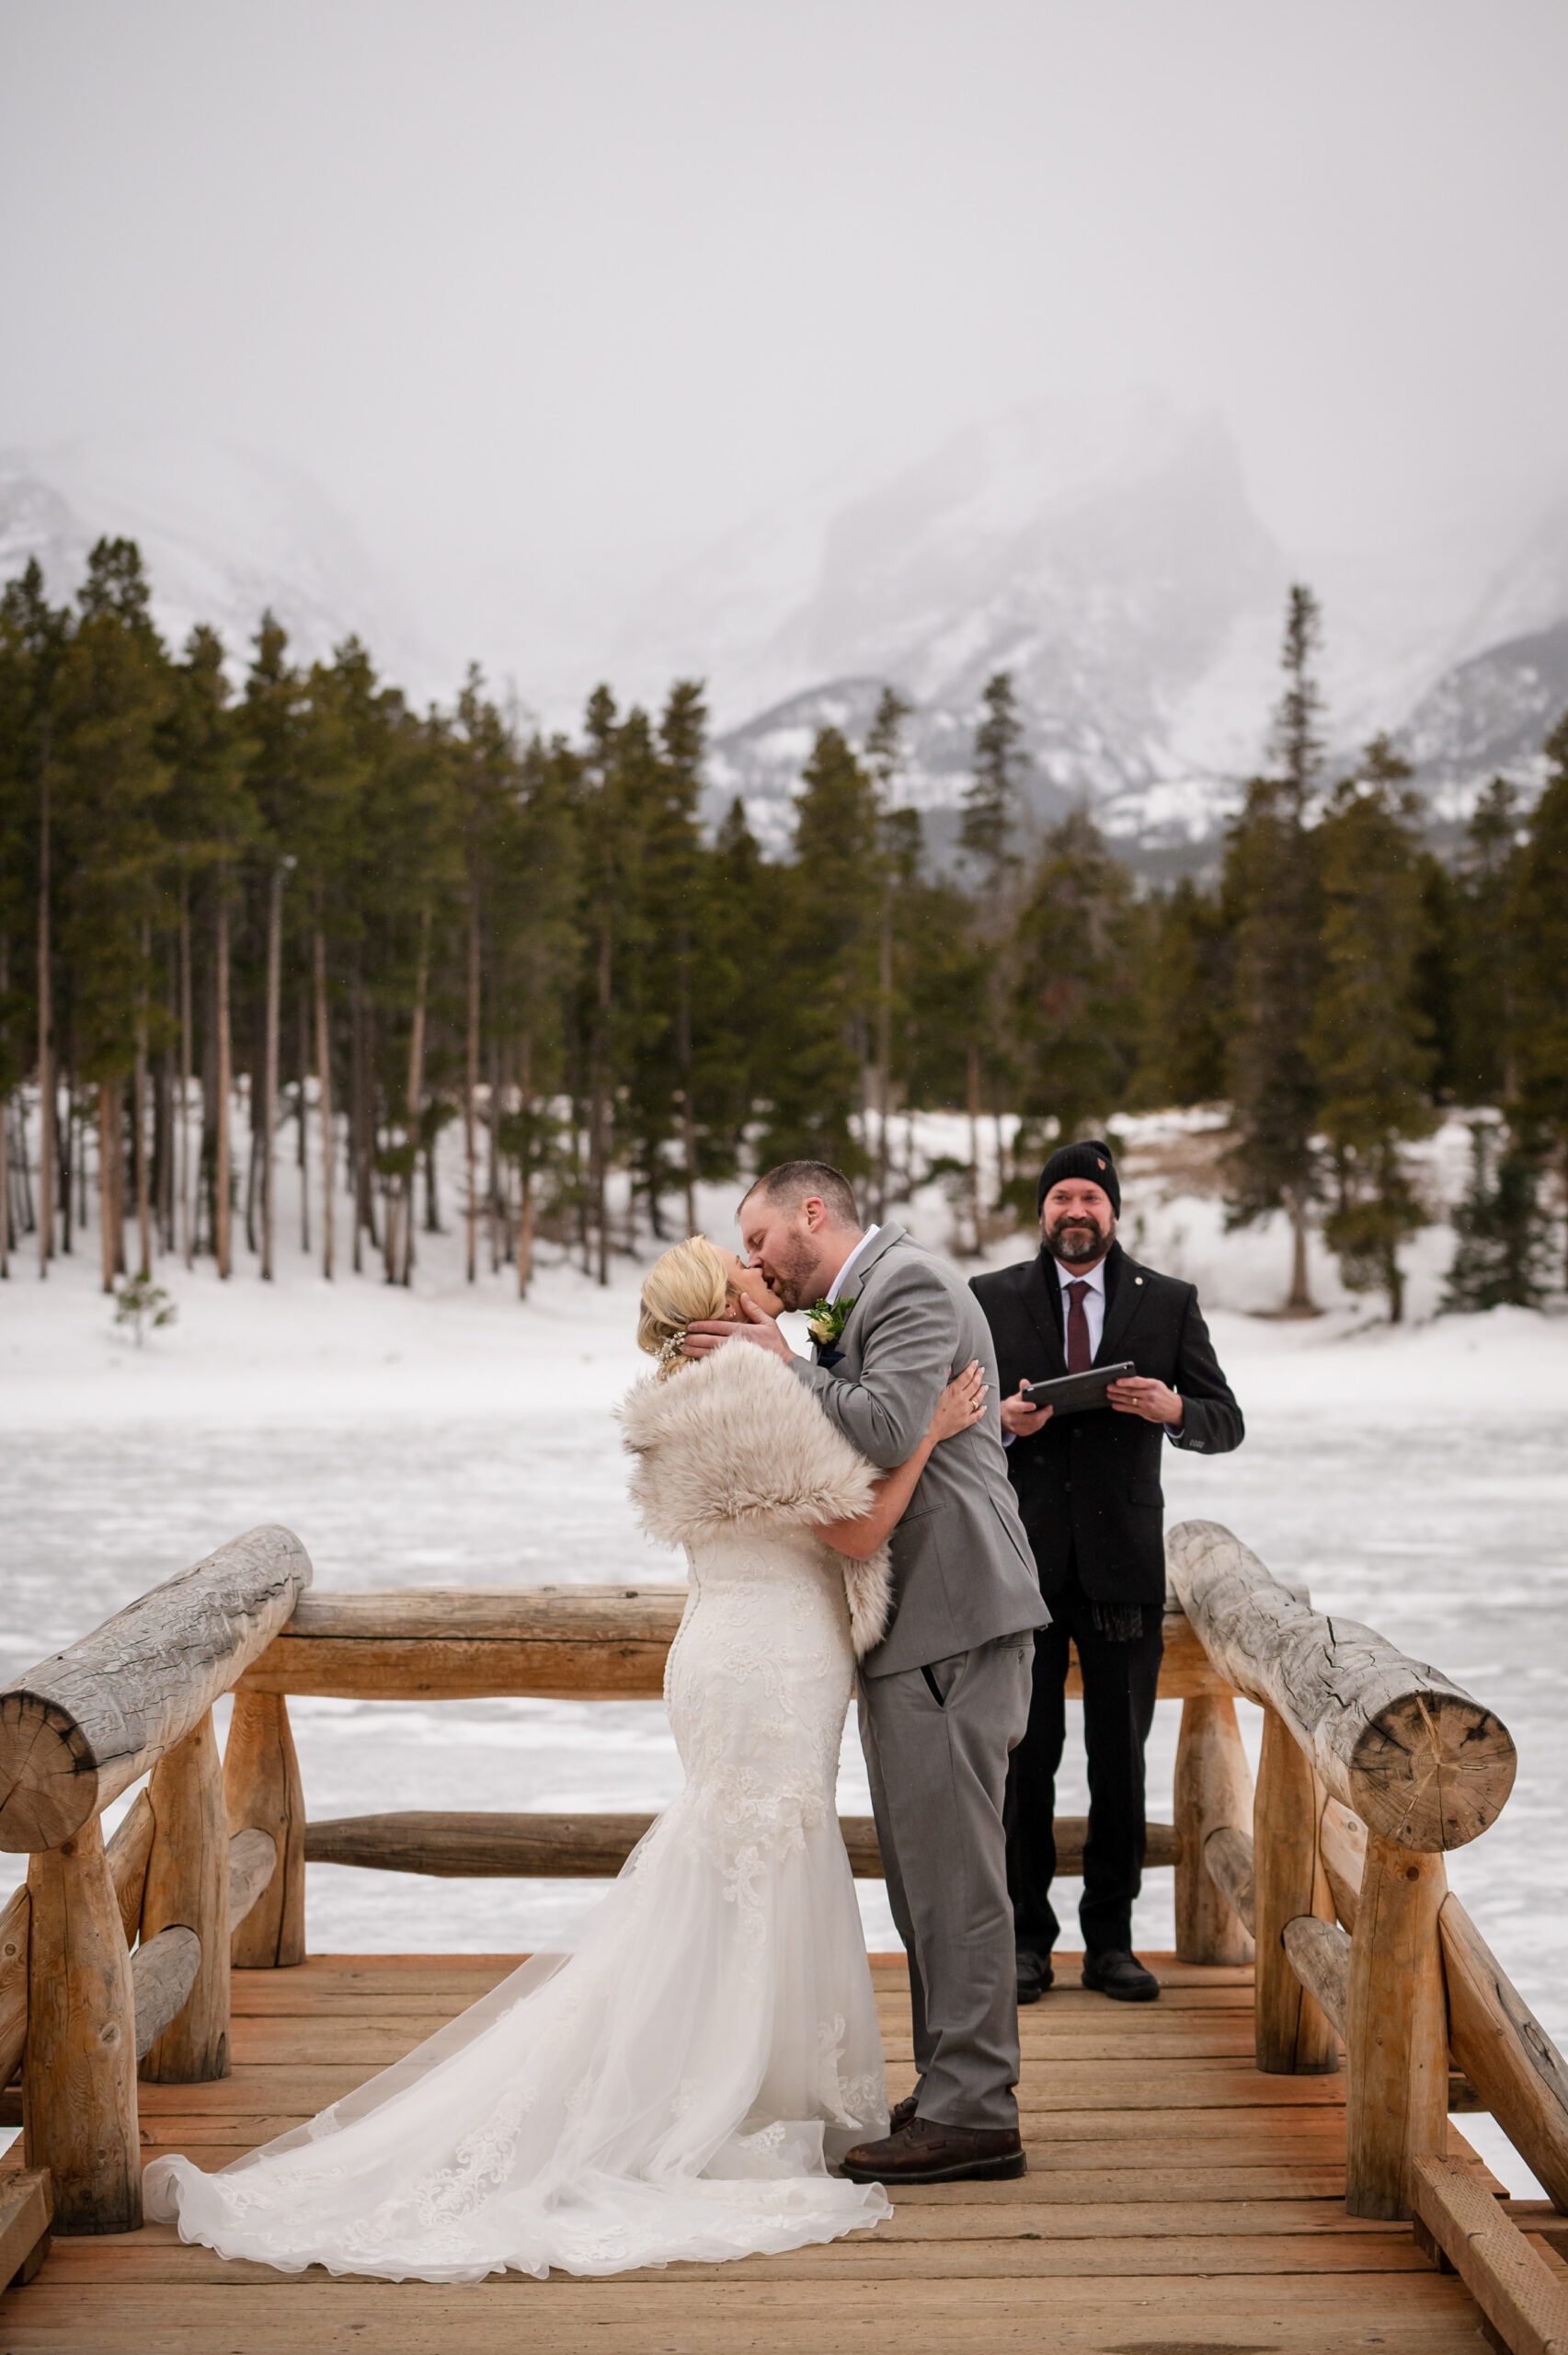 their first kiss as newlyweds, during their Winter Elopement at Sprague Lake. 